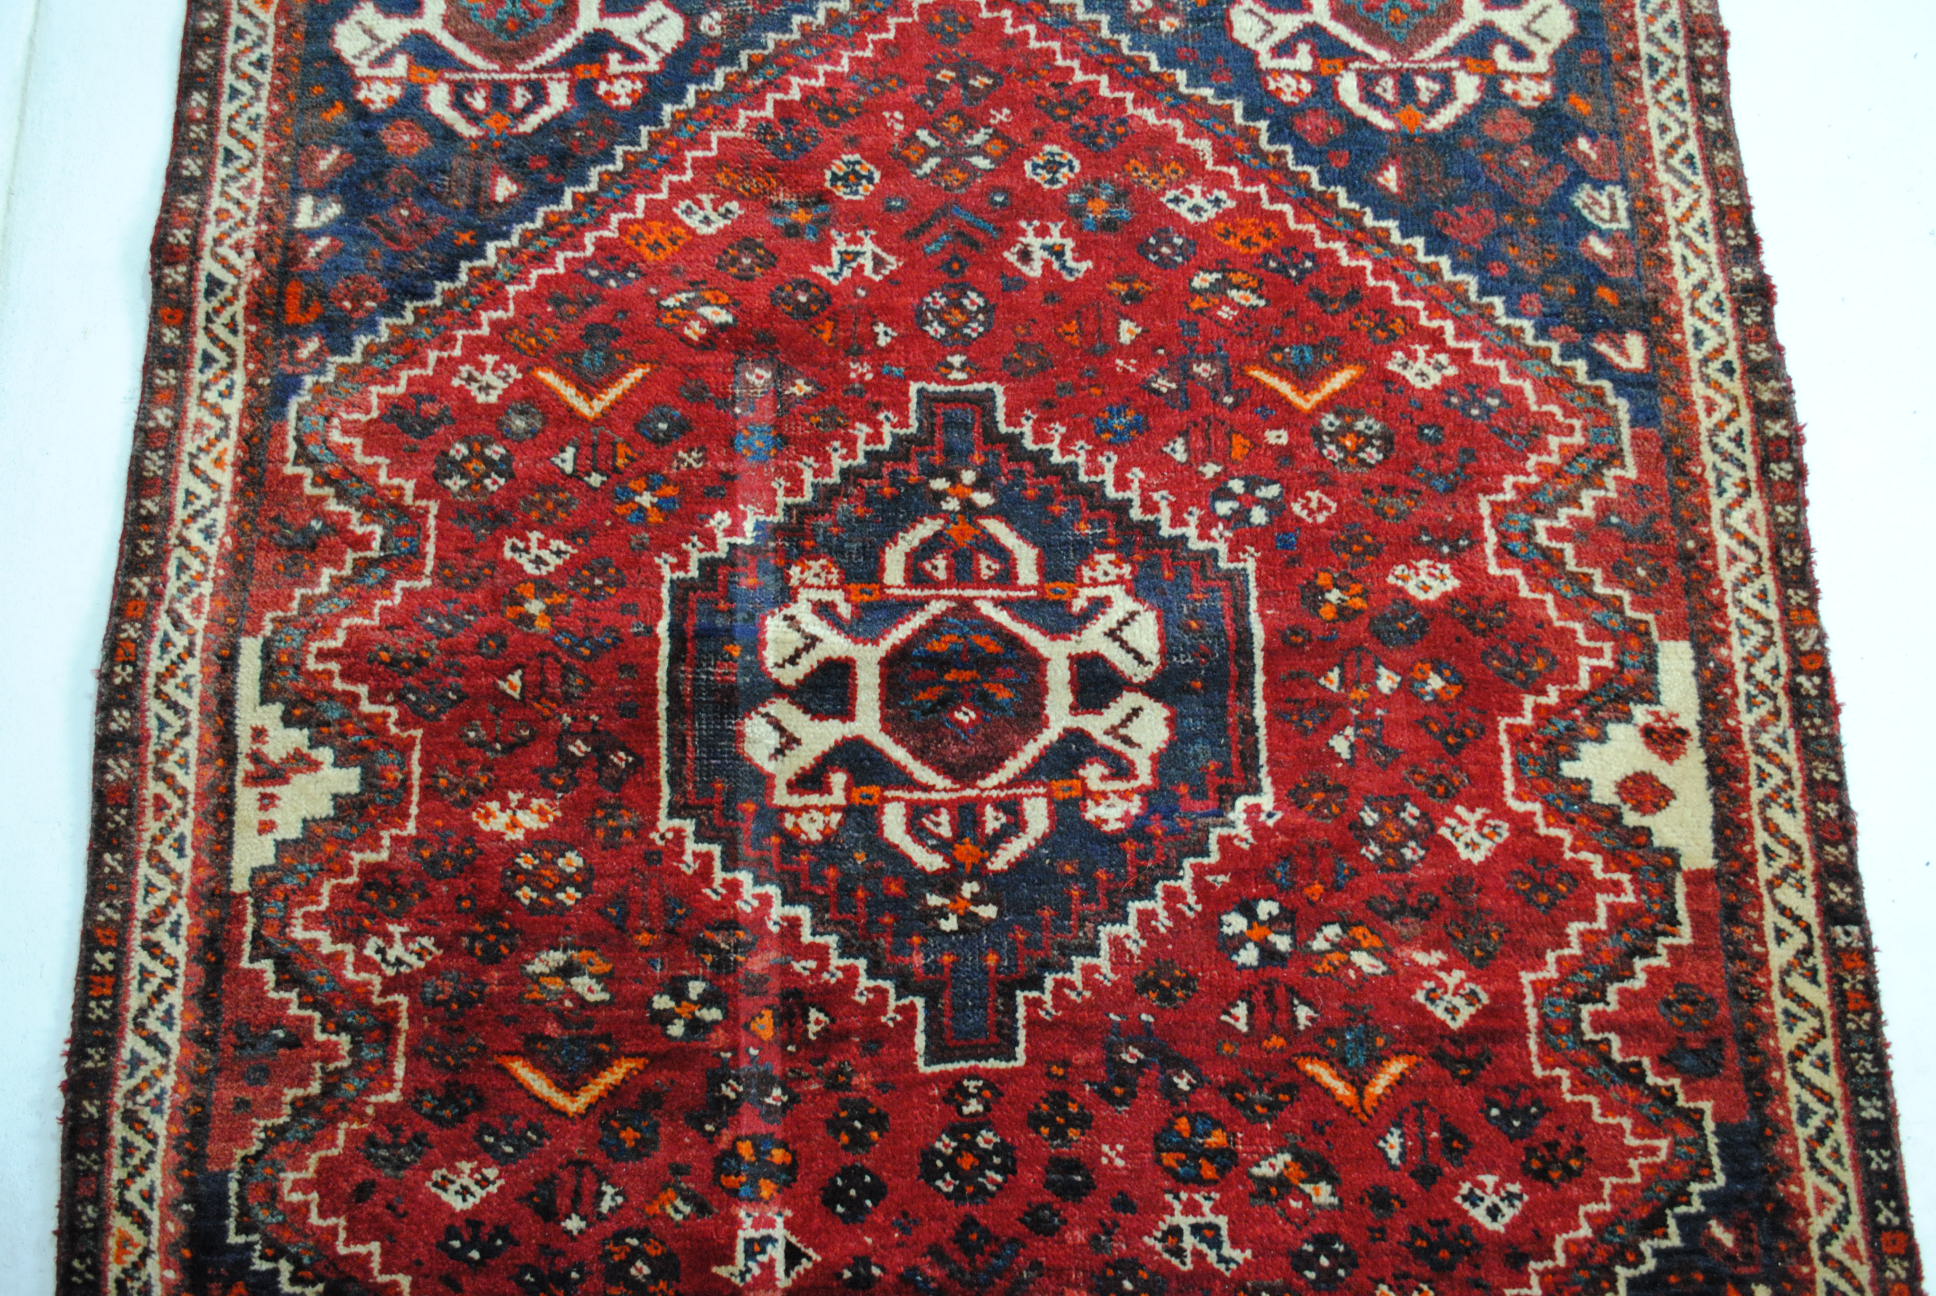 An Eastern red ground rug, with traditional designs - 173cm x 123cm - Image 5 of 8